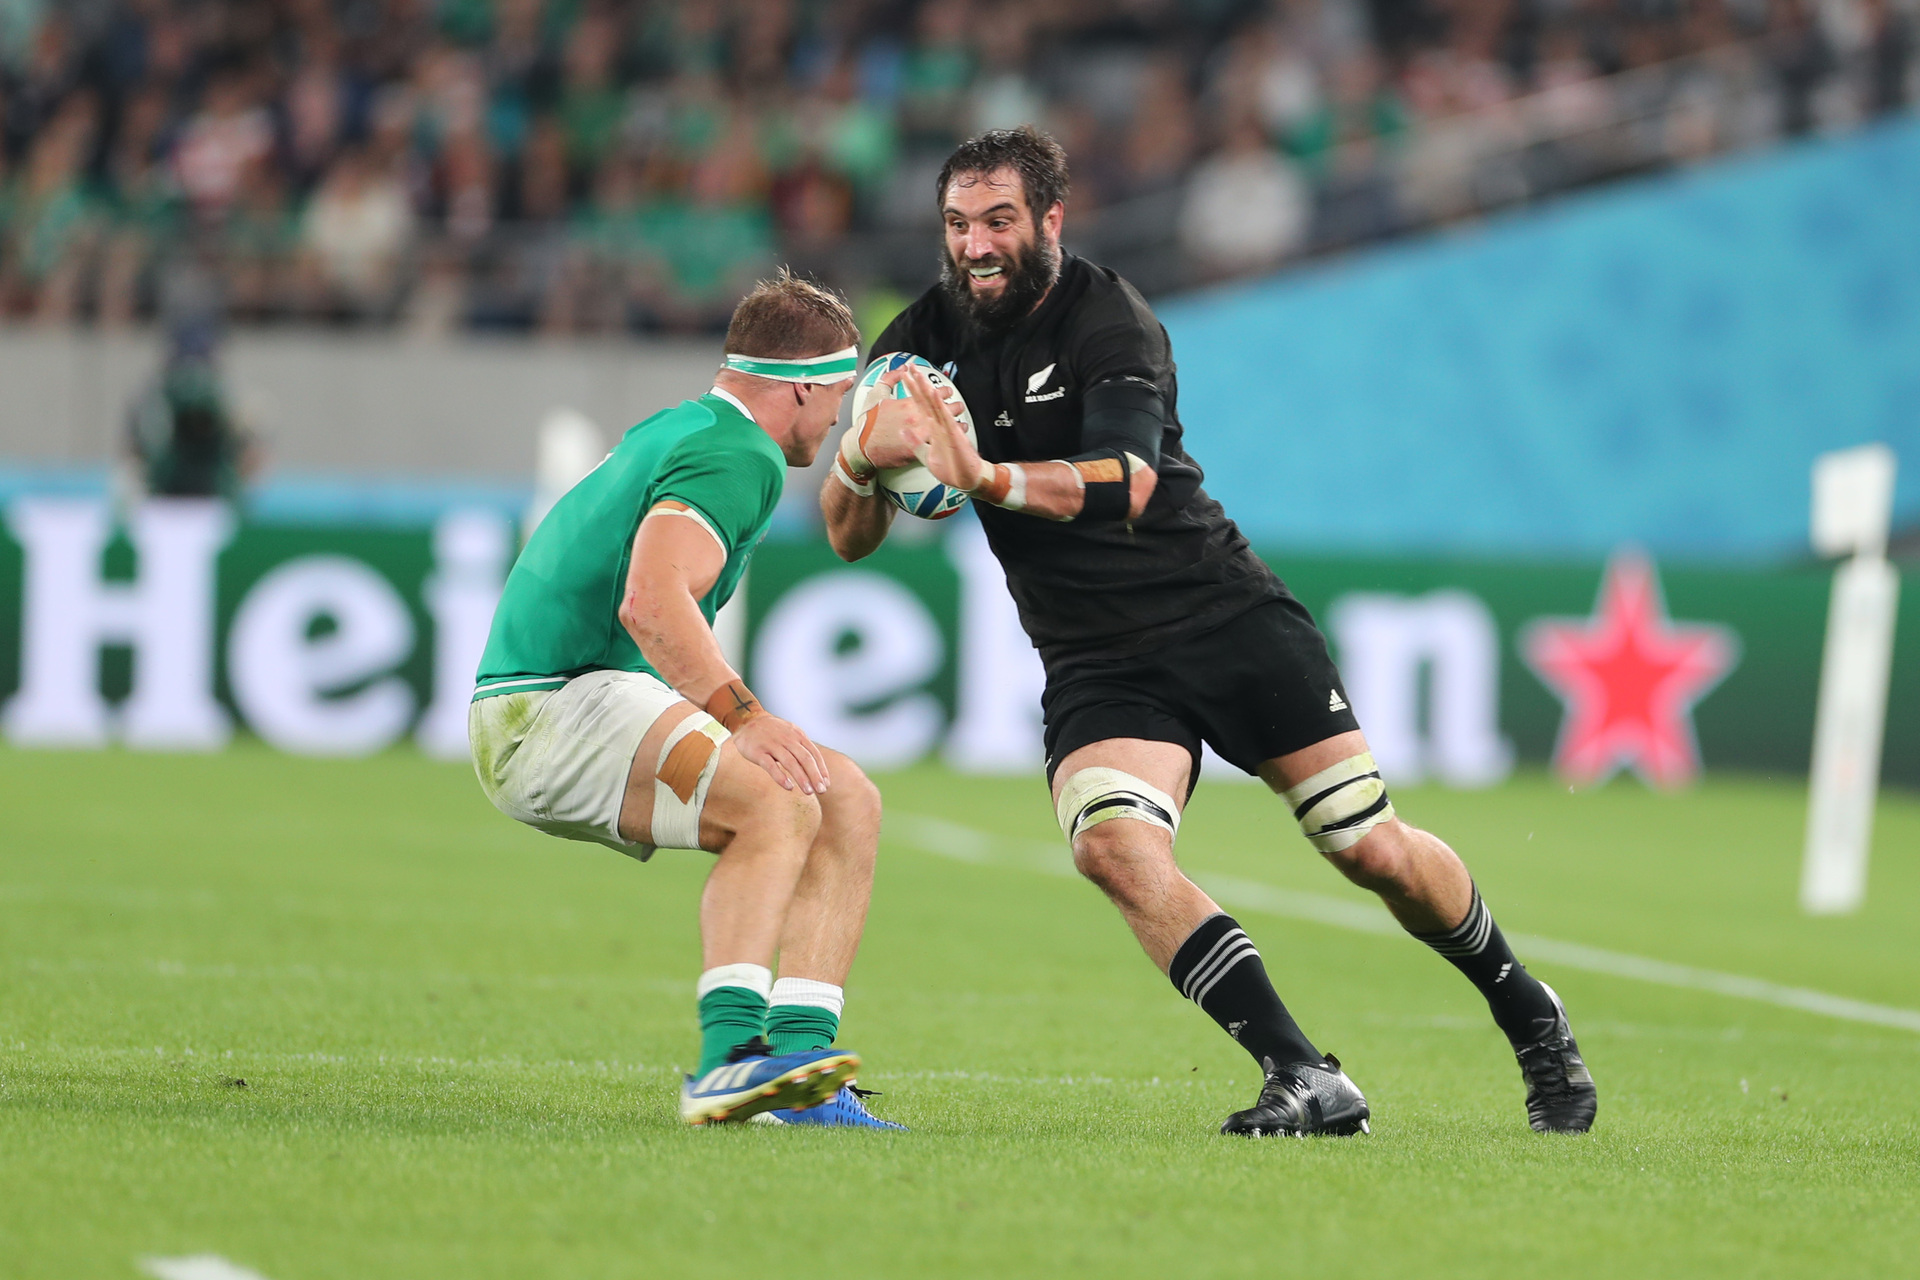 Rugby All Blacks v Ireland - teams, kick-off time, live streaming and how to watch